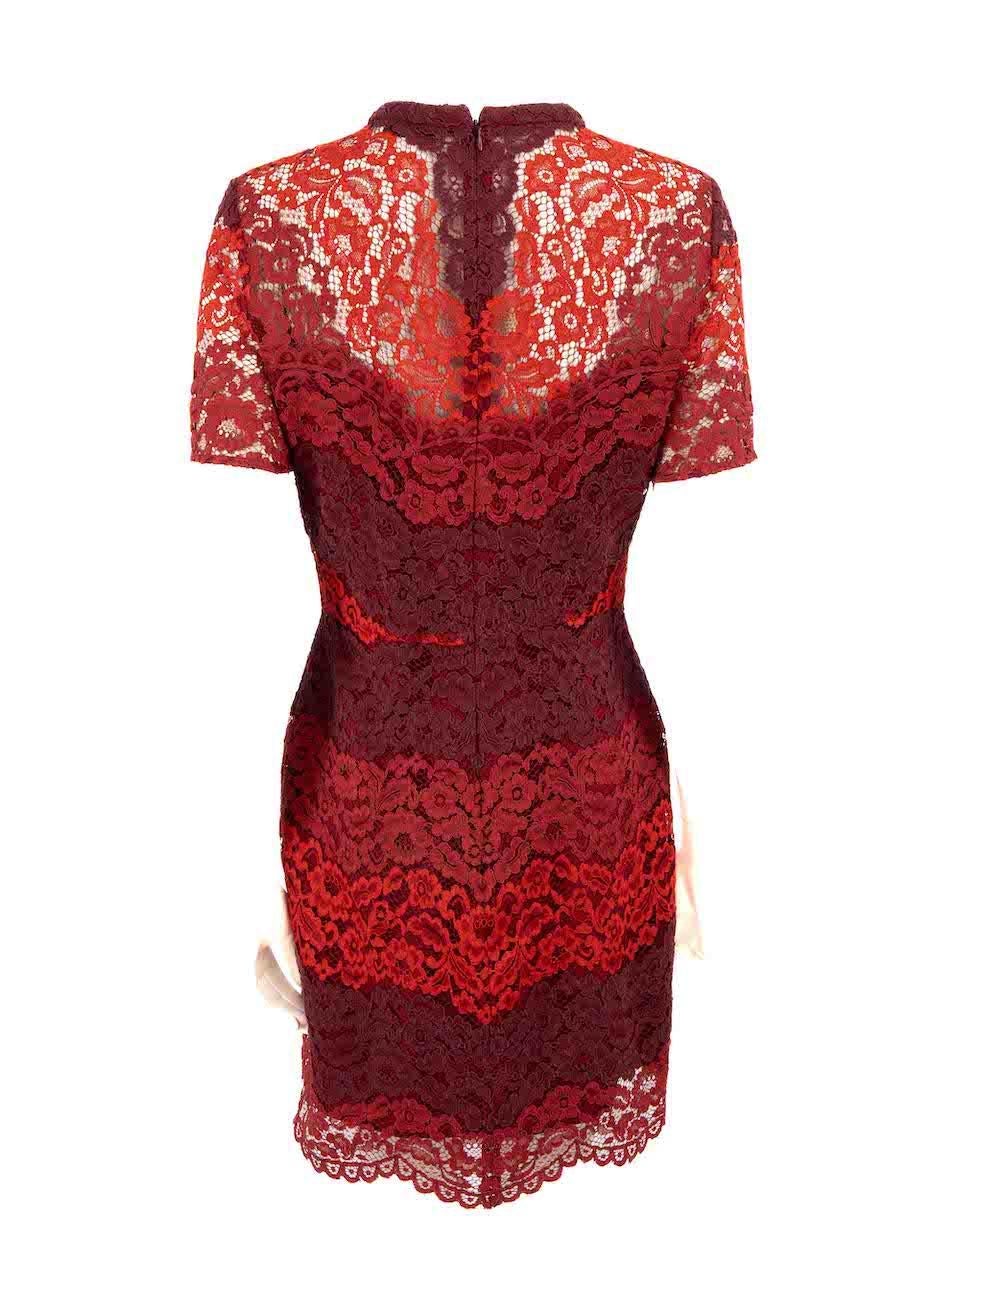 Sandro Red Lace Dress Size L In Good Condition For Sale In London, GB